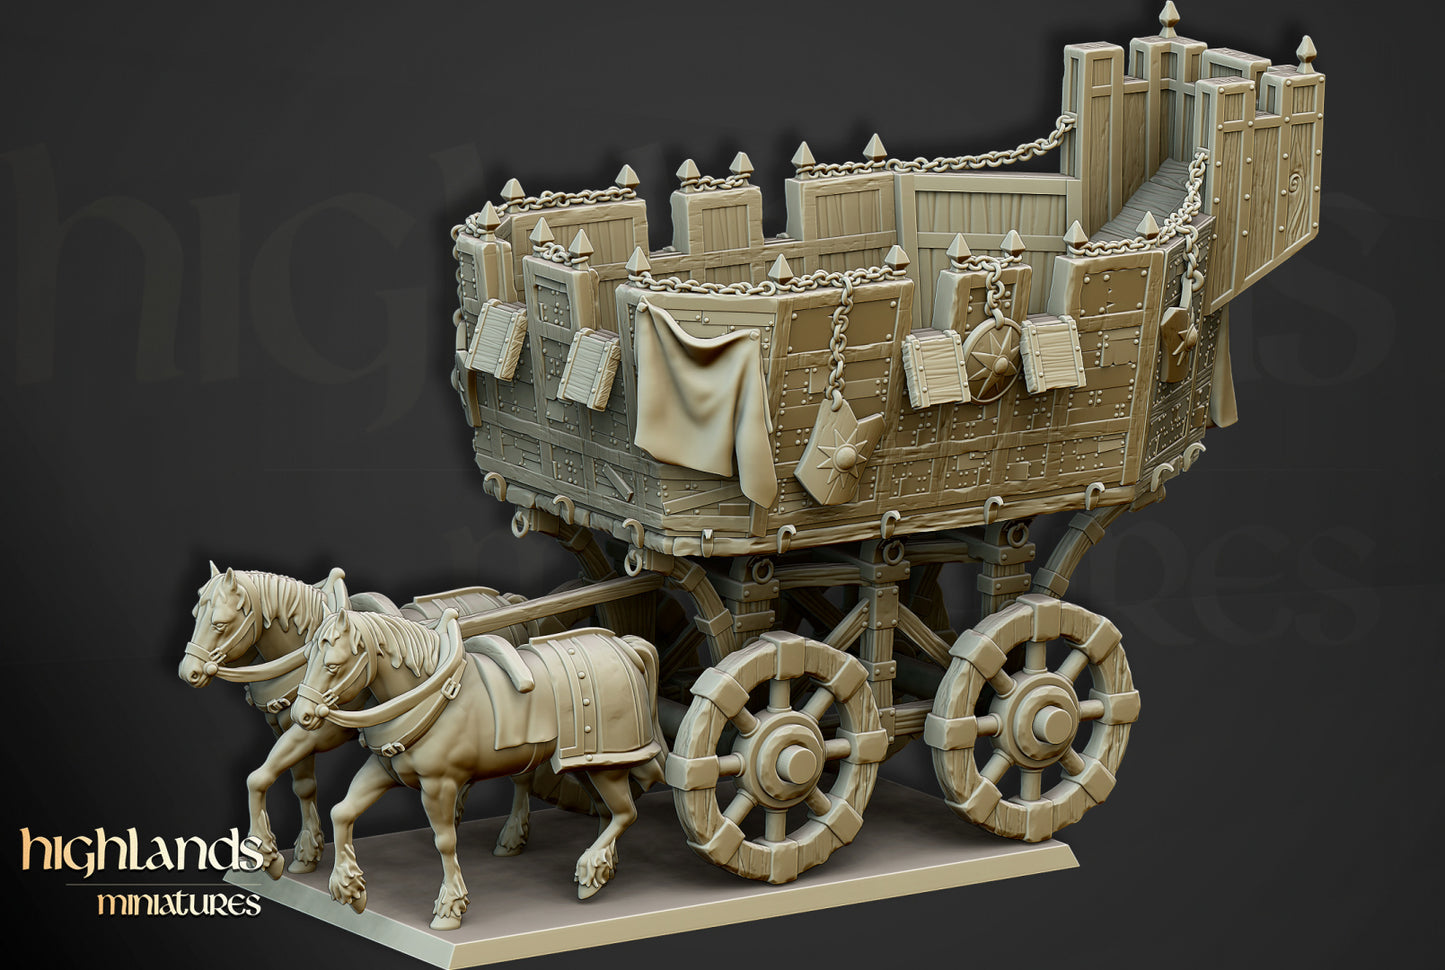 The Wittemberg Wagon by Highlands Miniatures